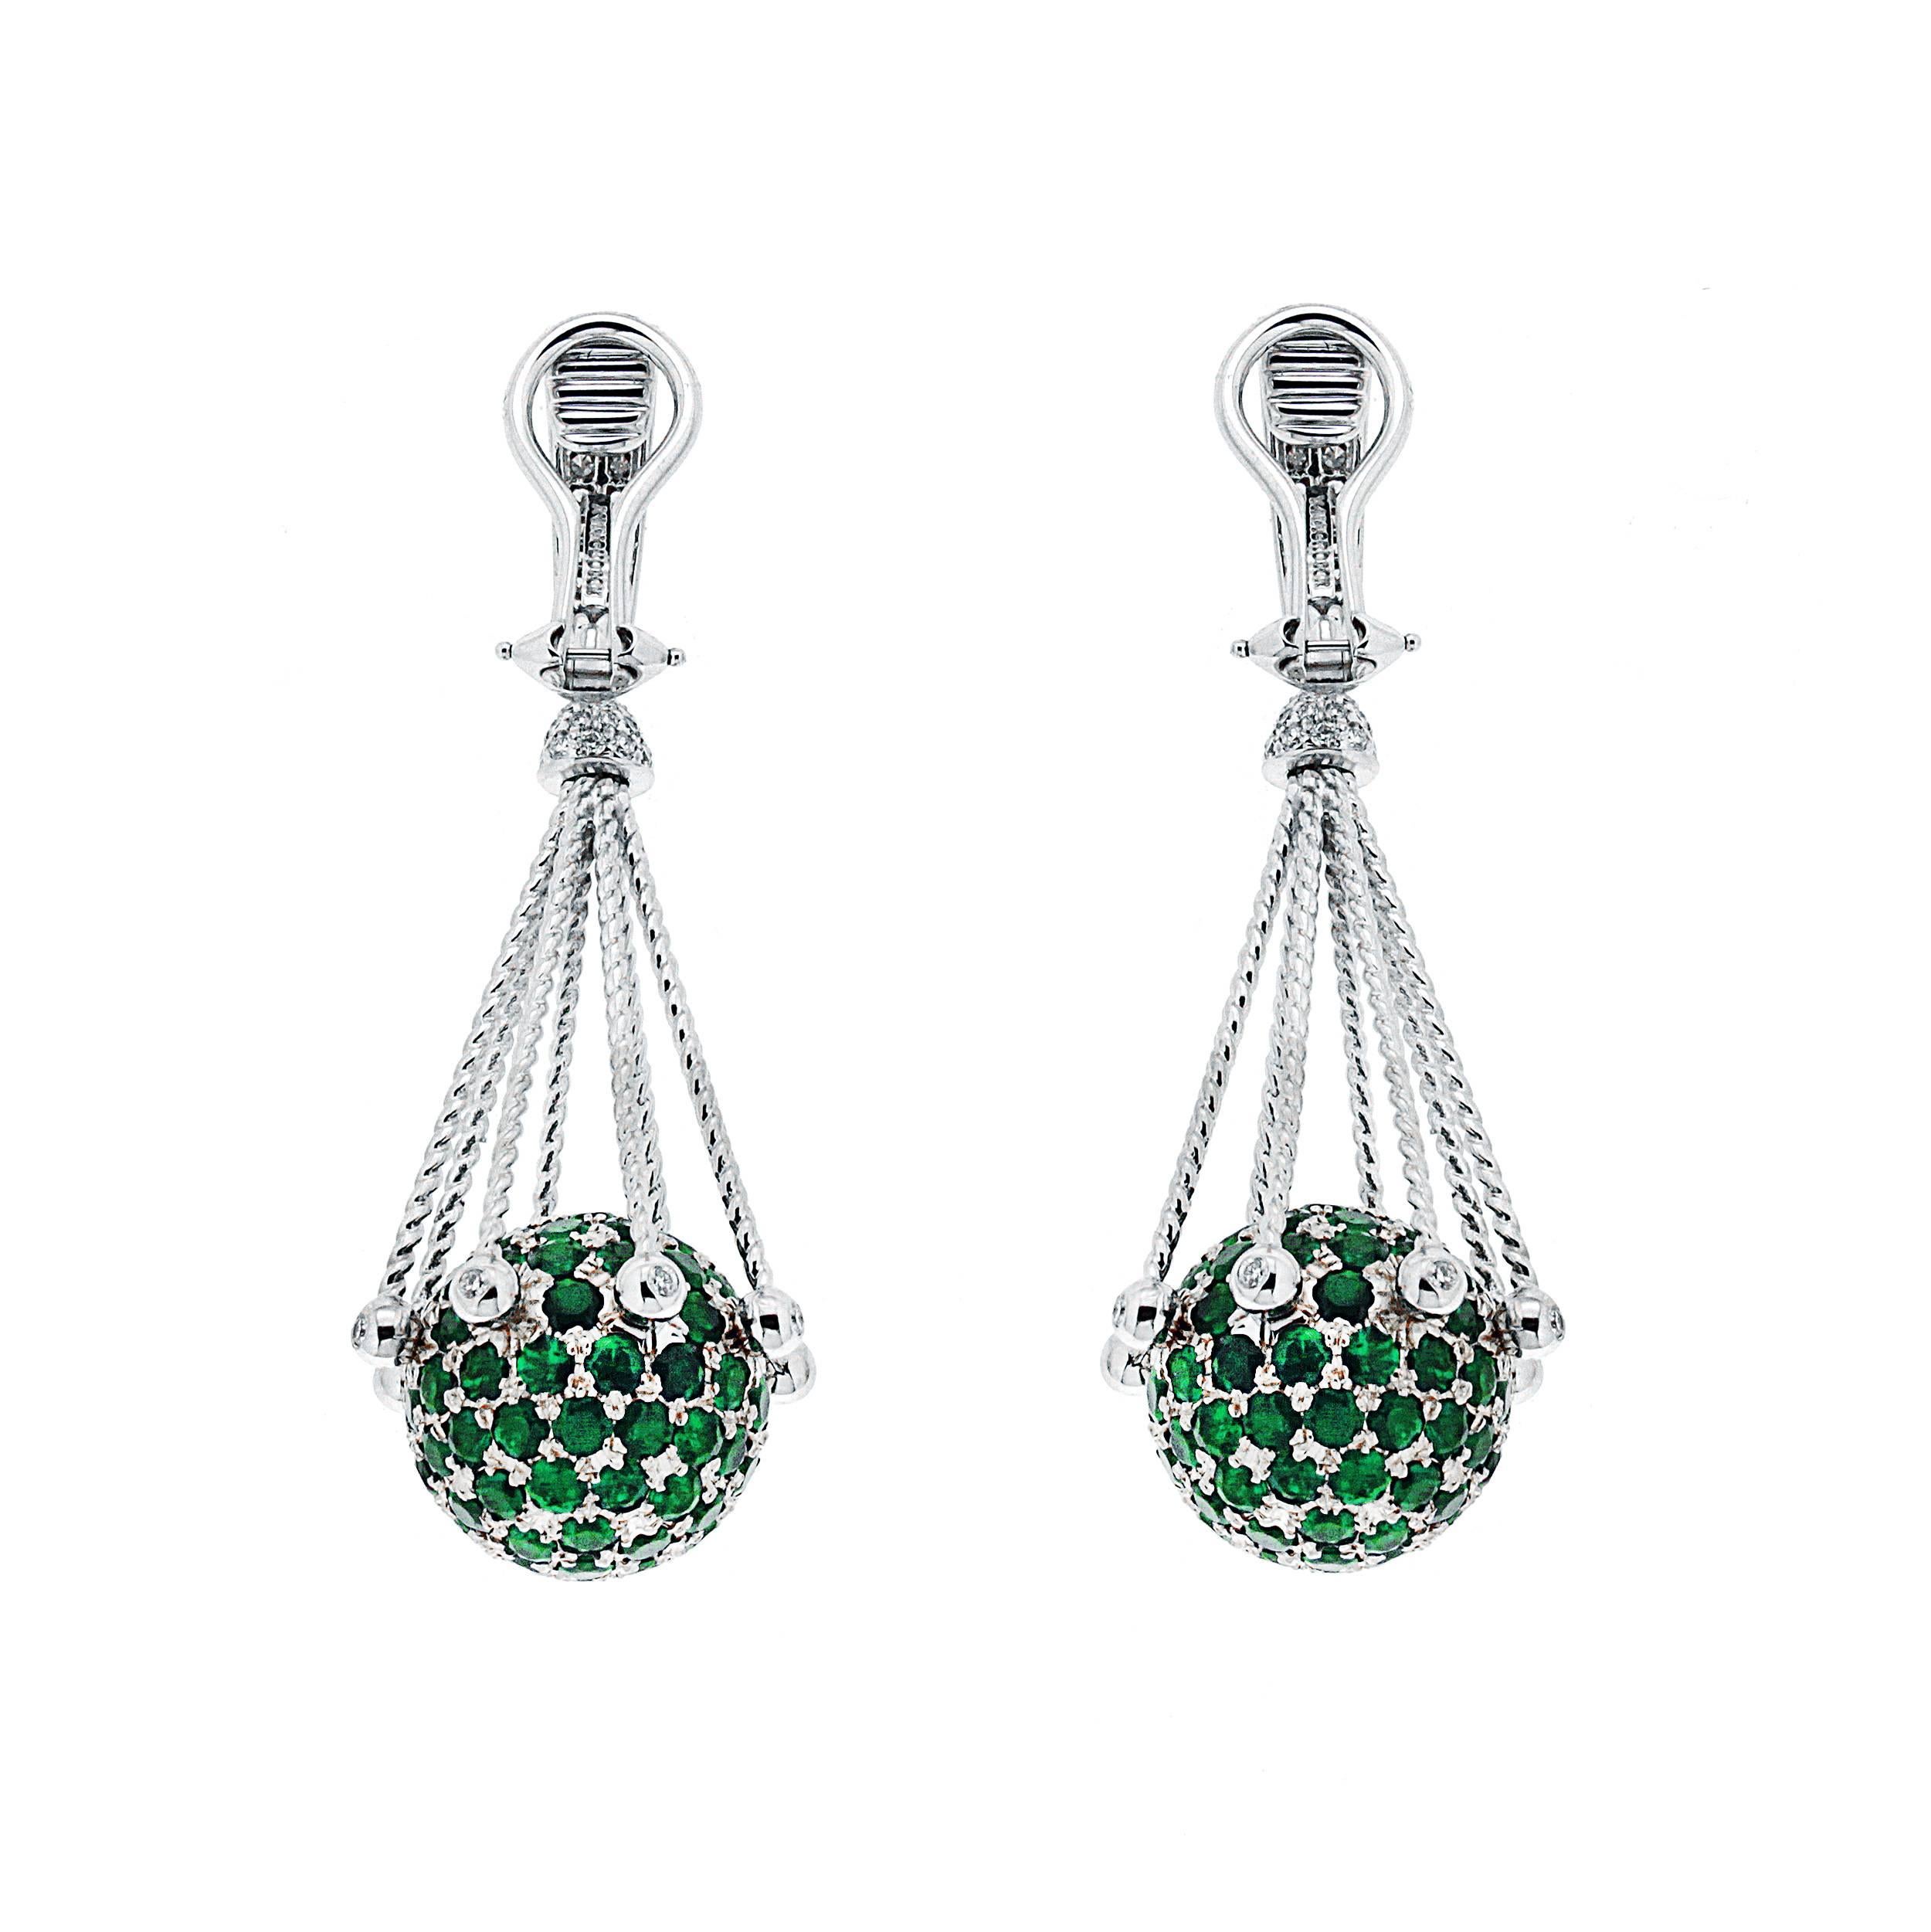 Each of these elegant dangling ball earrings features a pave emerald ball with diamond pave on the lever in 18 karat white gold. Clip backs (posts can be added on after purchase).